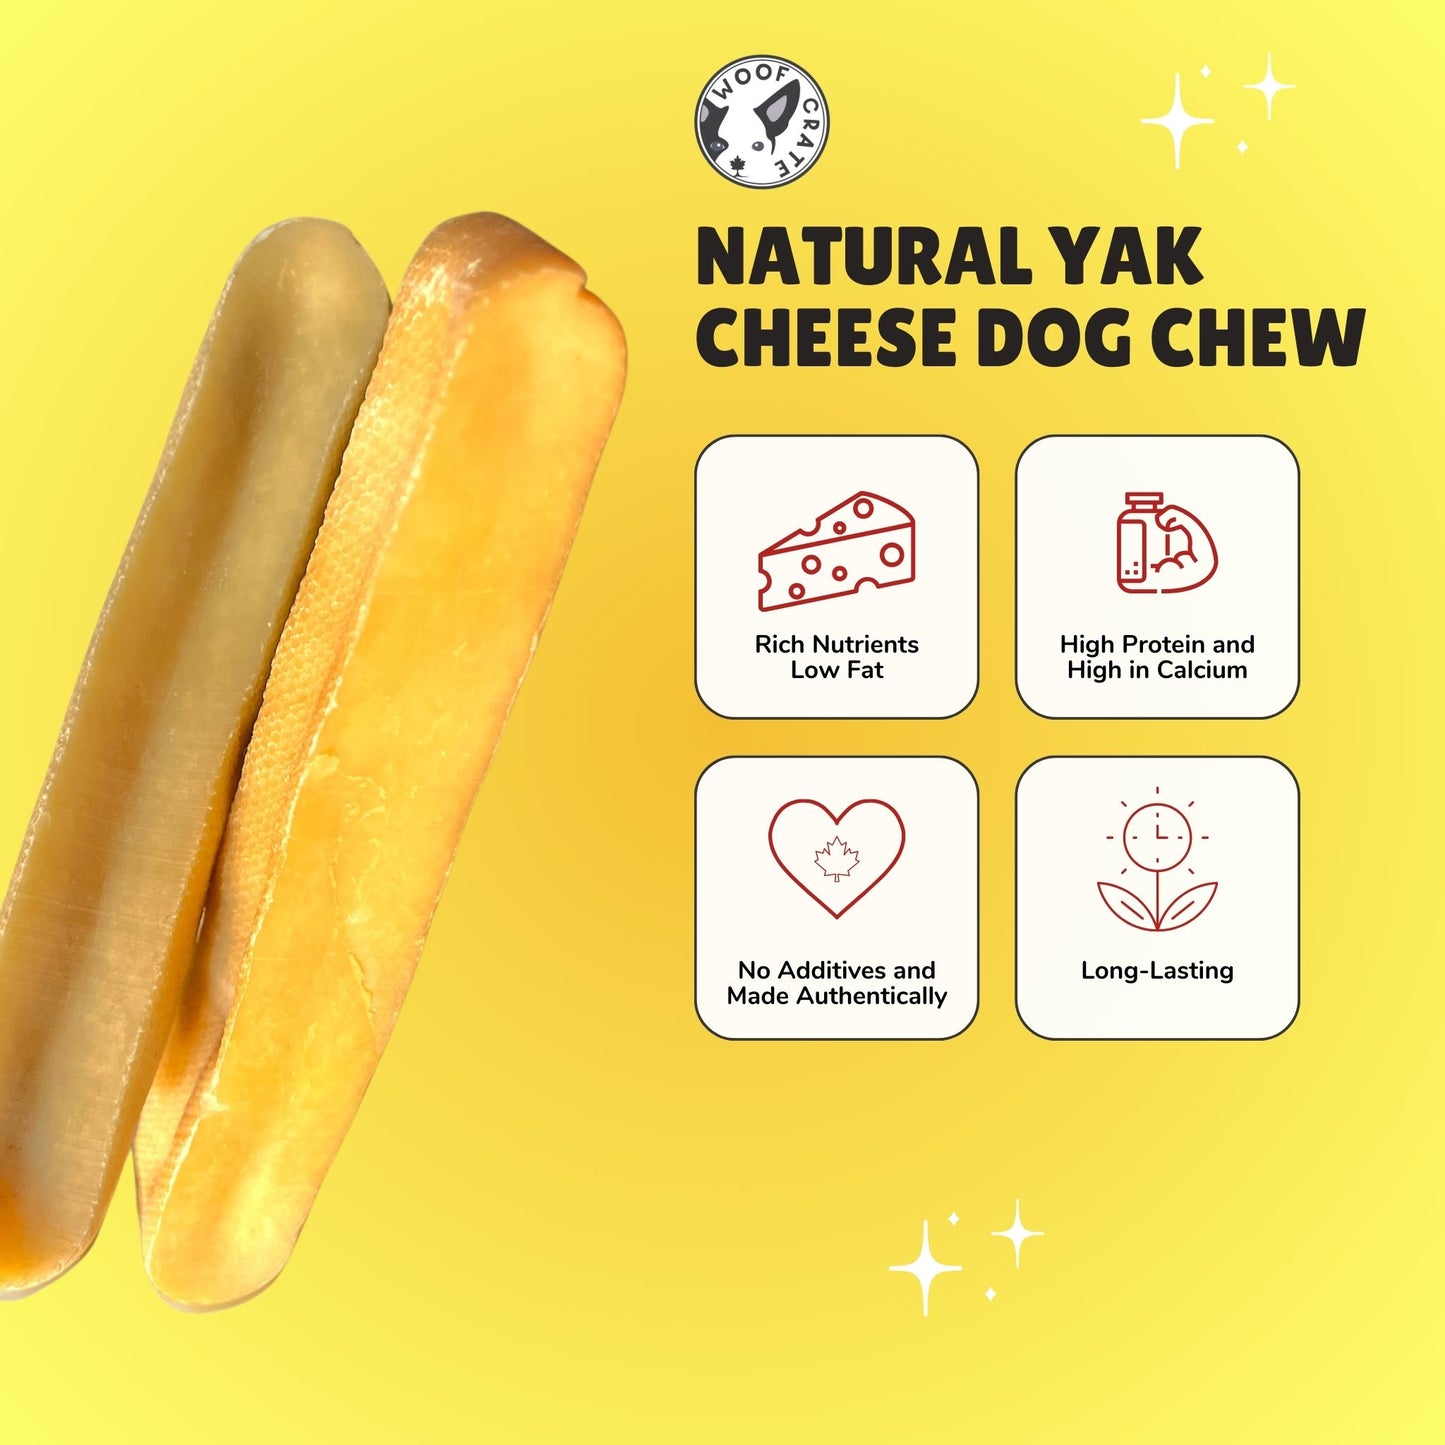 Infographic showing the benefits of yak chews for dogs. Including being rich in nutrients, low in fat, high in protein and calcium, no additives and long lasting.